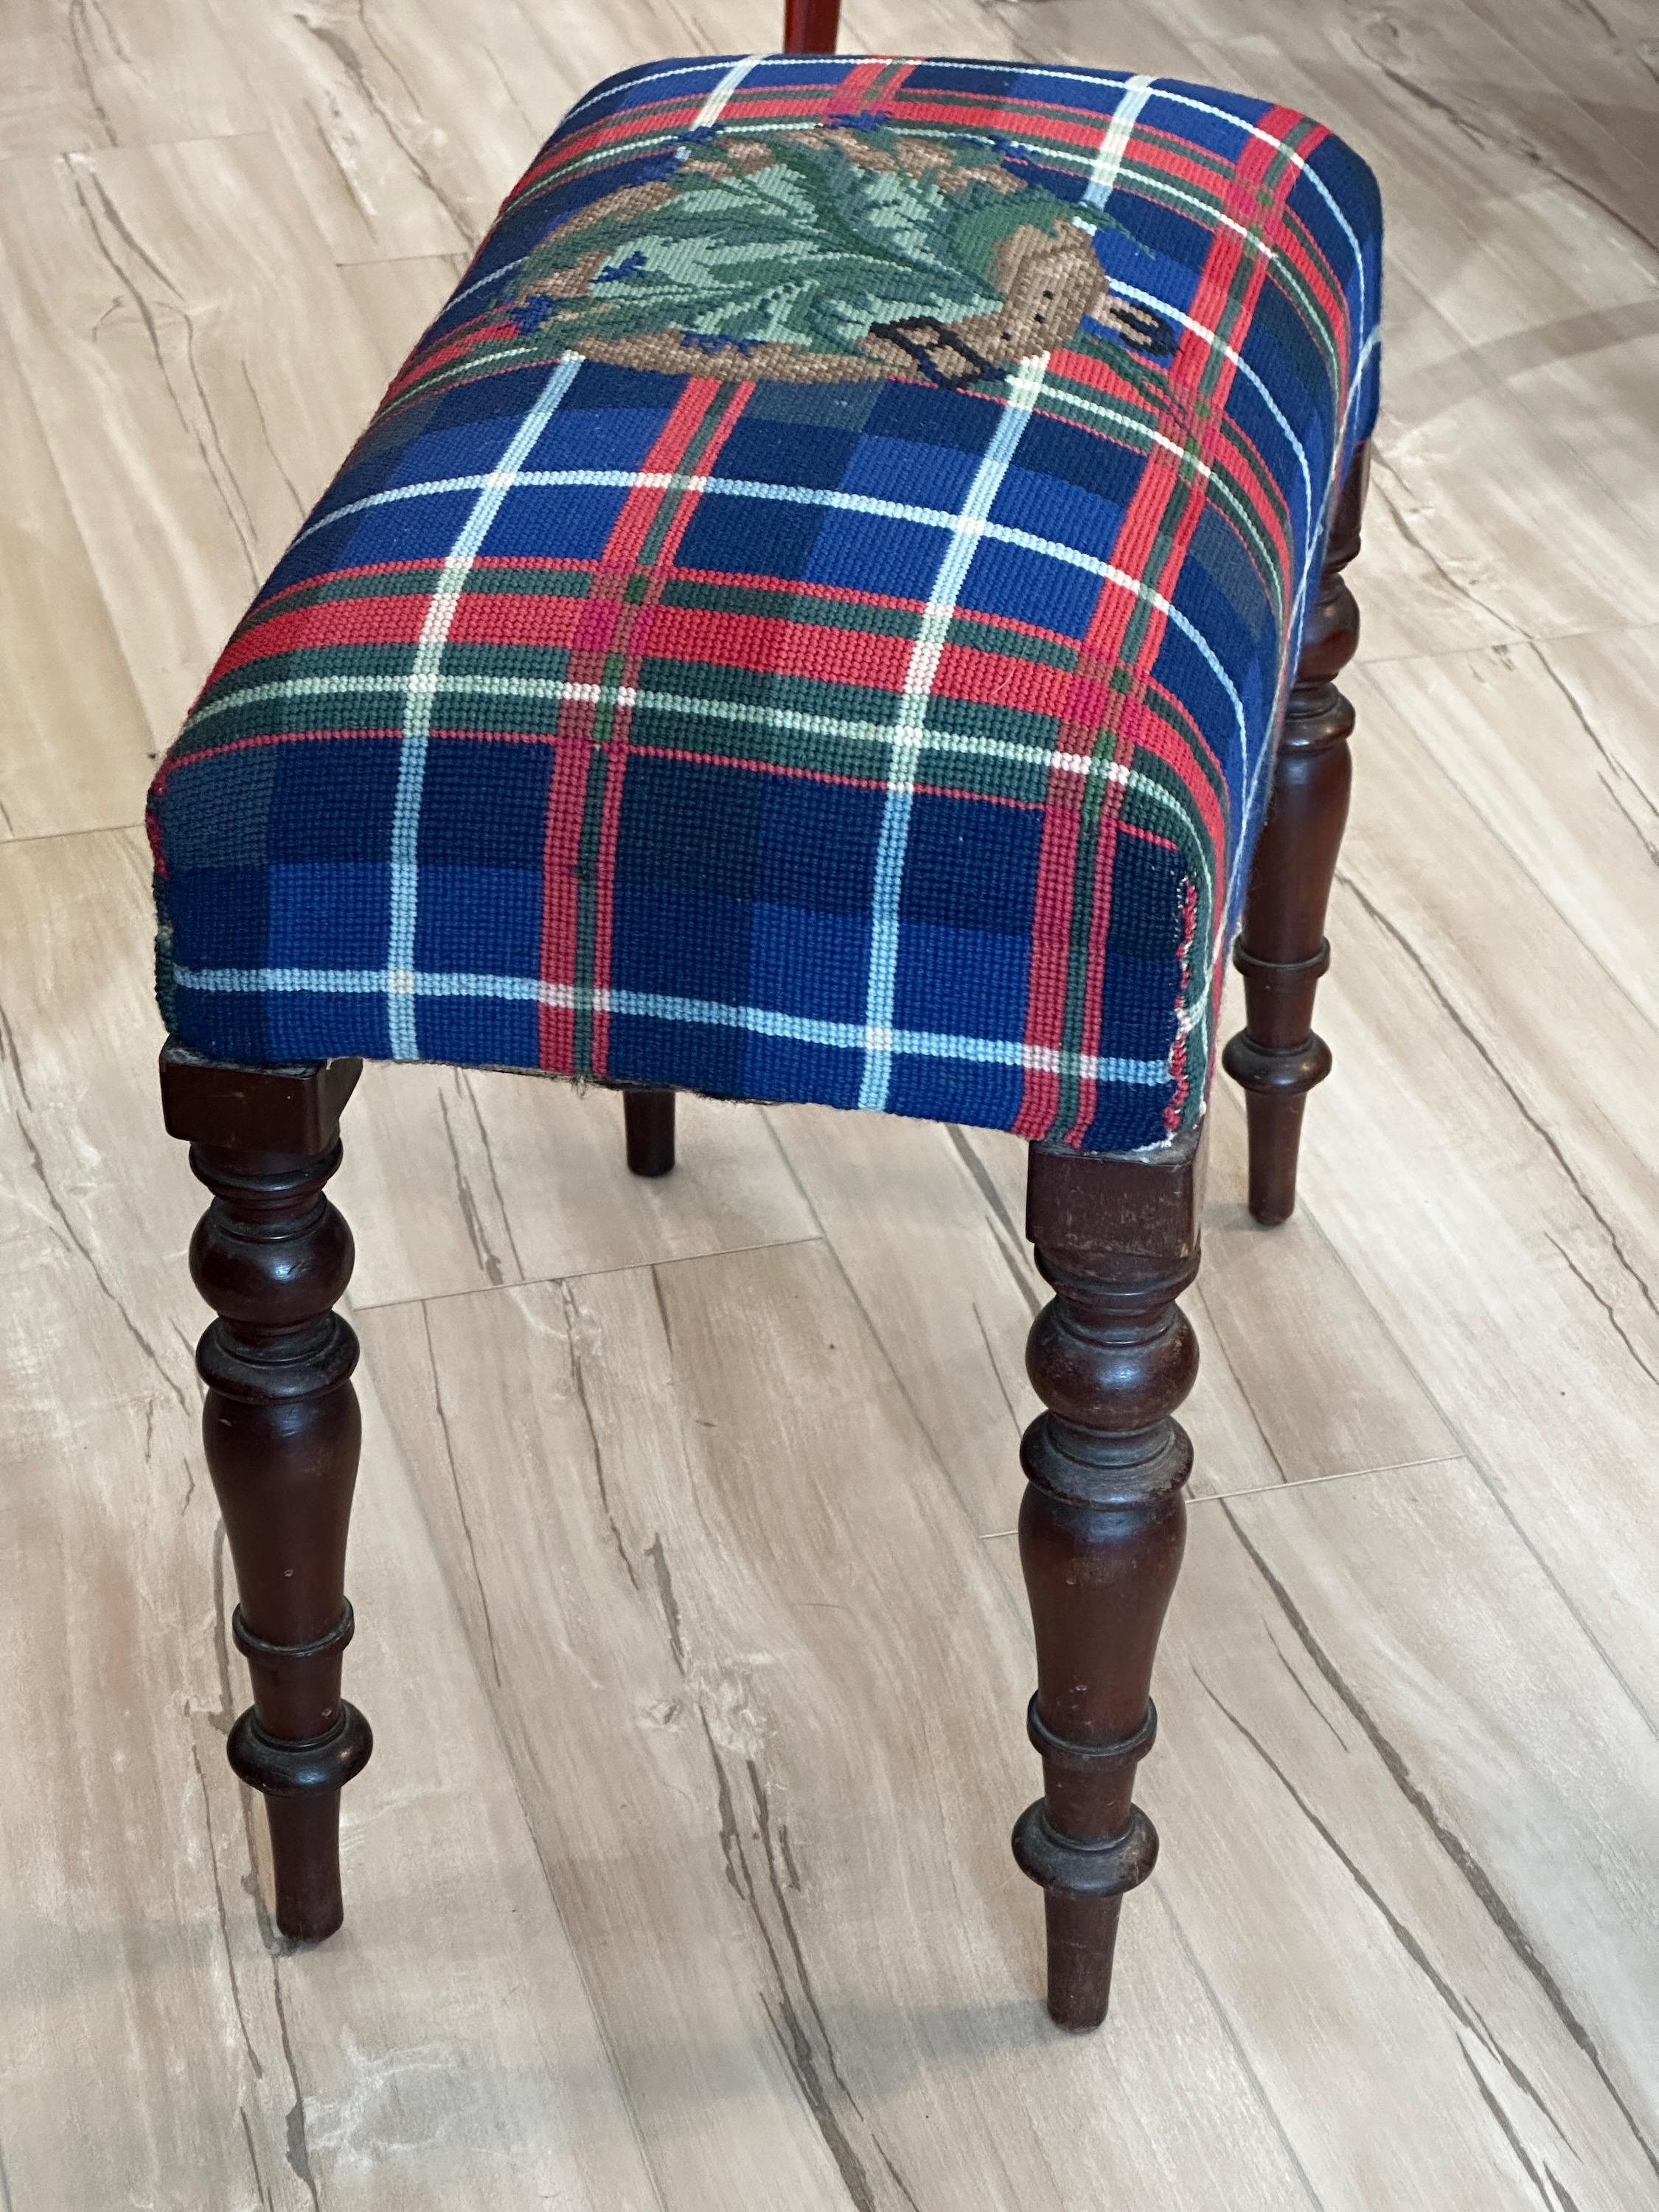 Hand-Crafted English Bench with Custom Needlepoint Cover